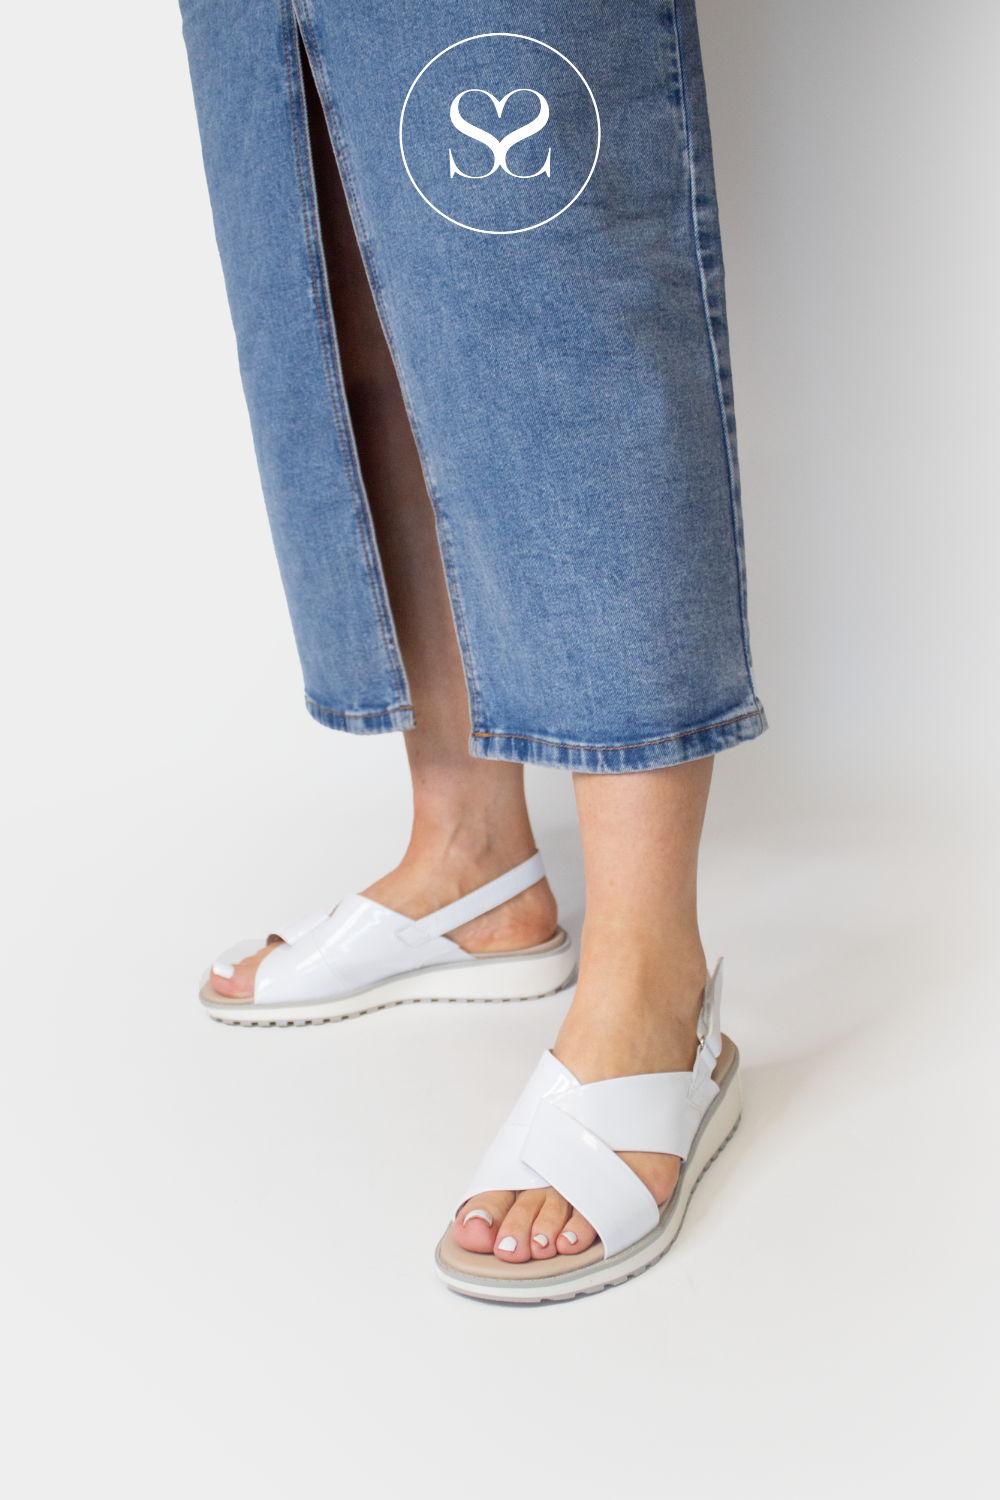 CAPRICE 9-28703-42 WHITE LEATHER FLAT SANDALS